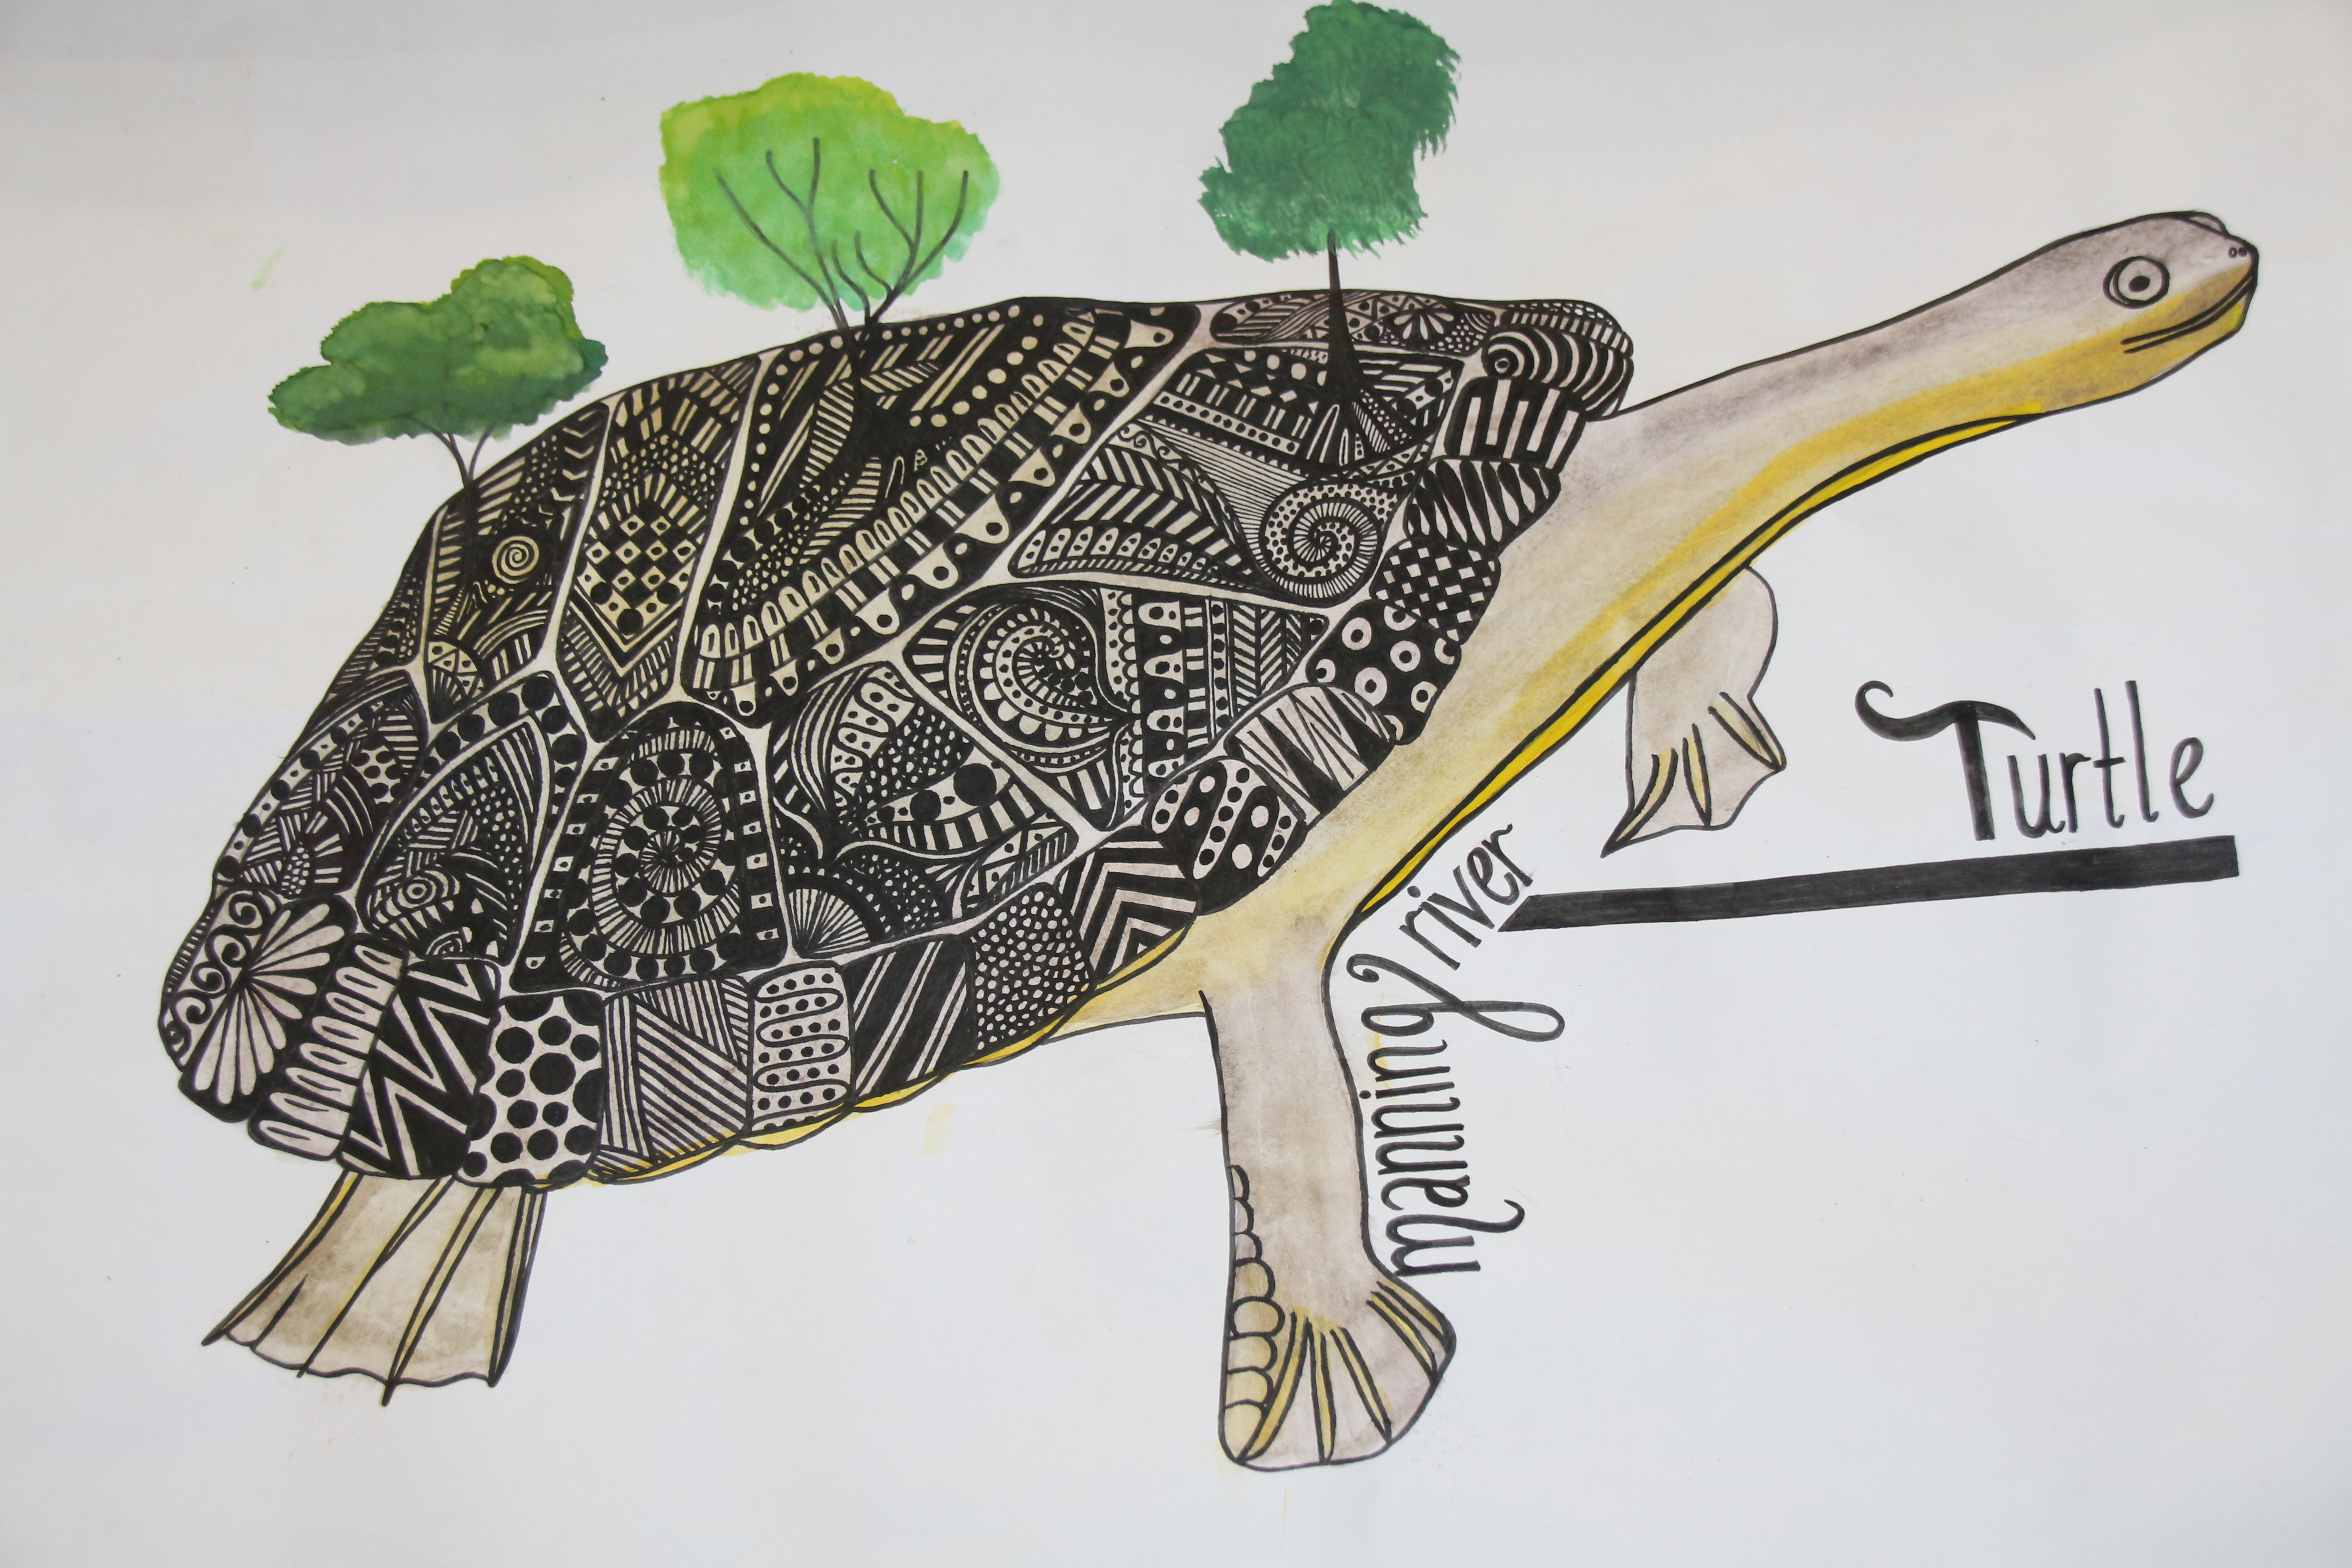  First prize in the 2017 Manning River Turtle Art Competition went to Olivia Payne, a year 11 student at Wingham High School.